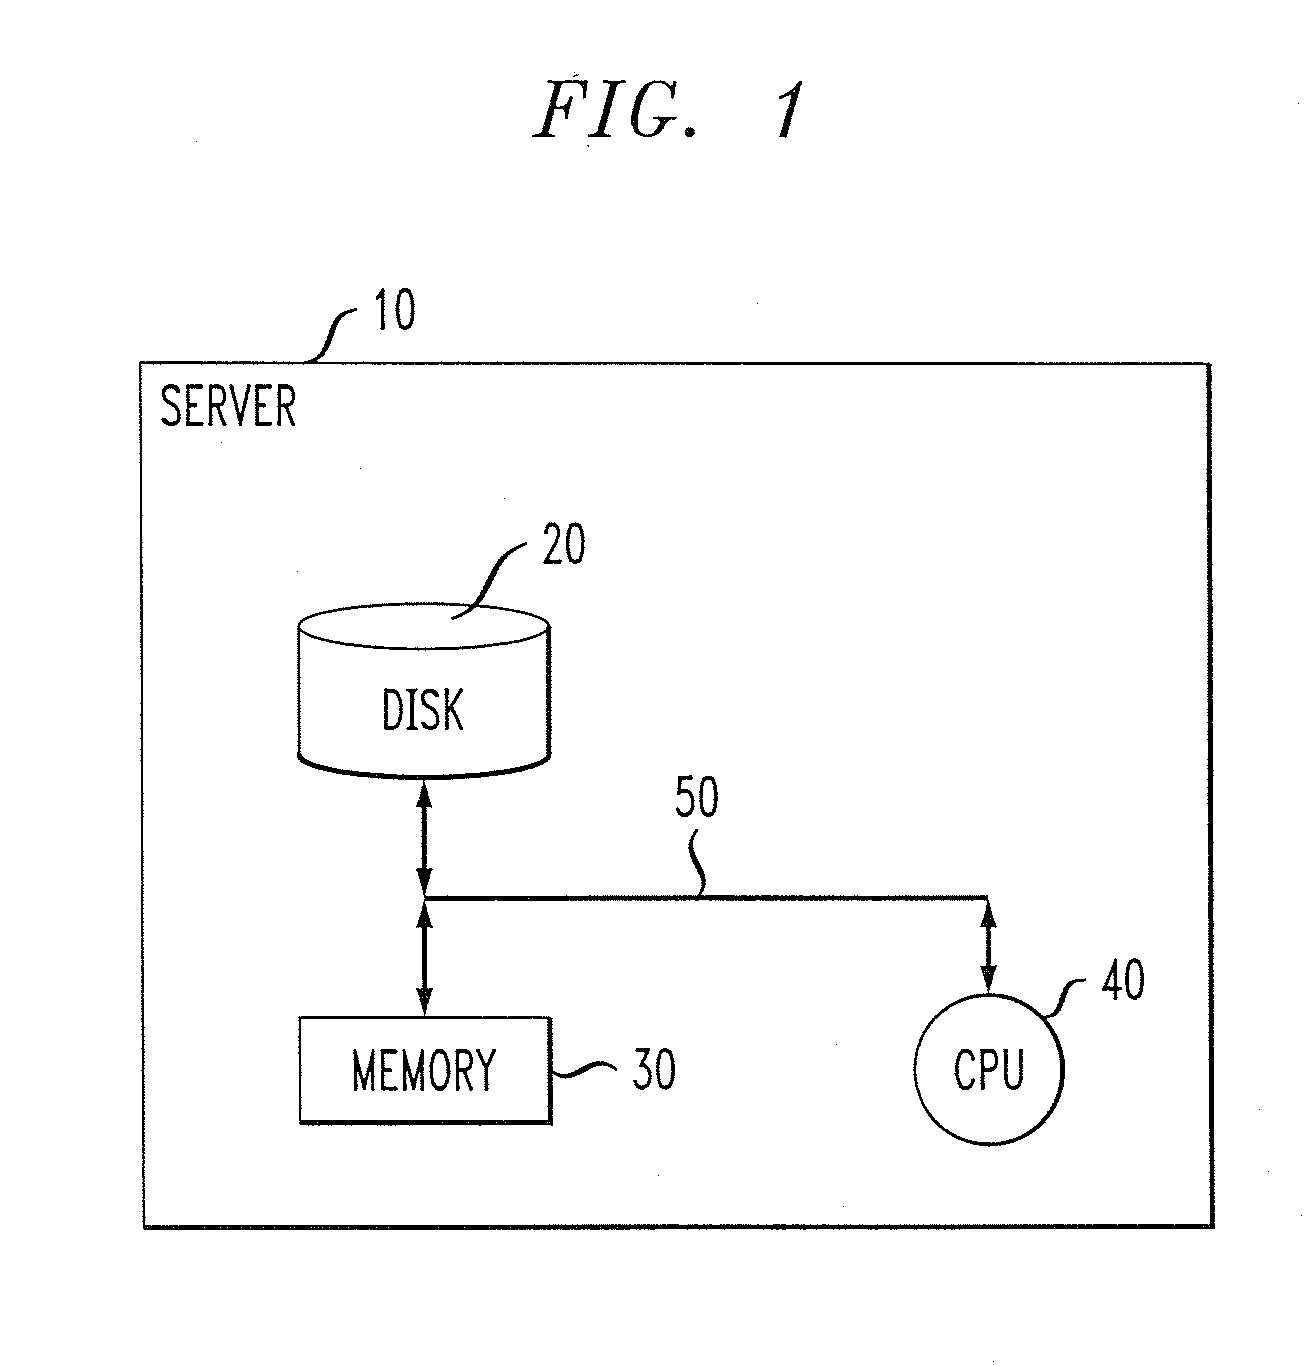 Performance Degradation Root Cause Prediction in a Distributed Computing System